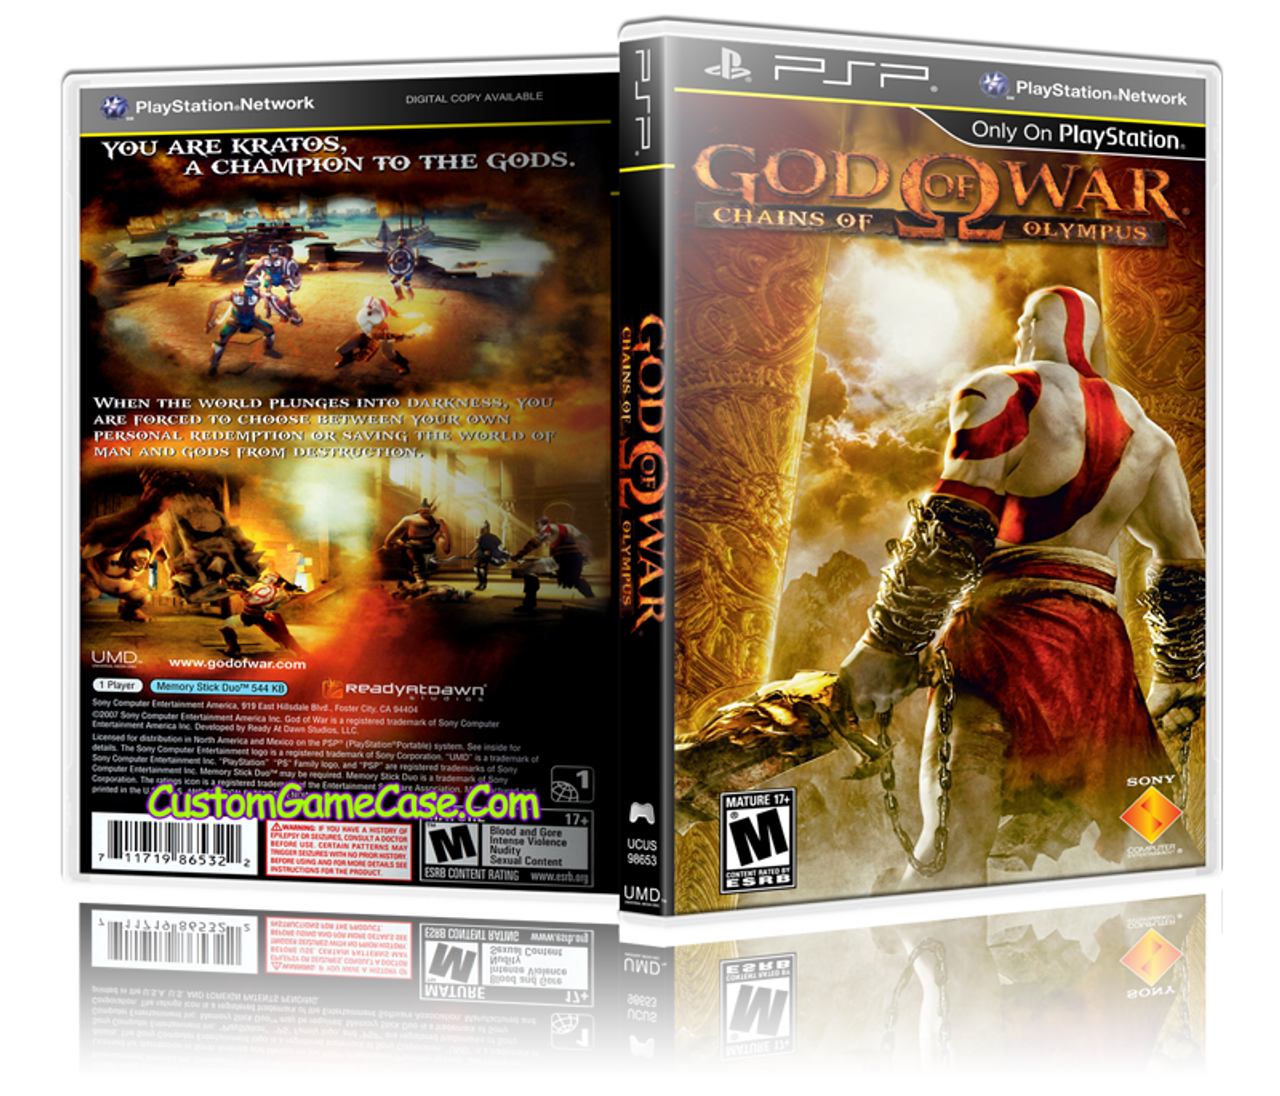 God of War: Chains of Olympus PSP Box Art Cover by Blairy_boy